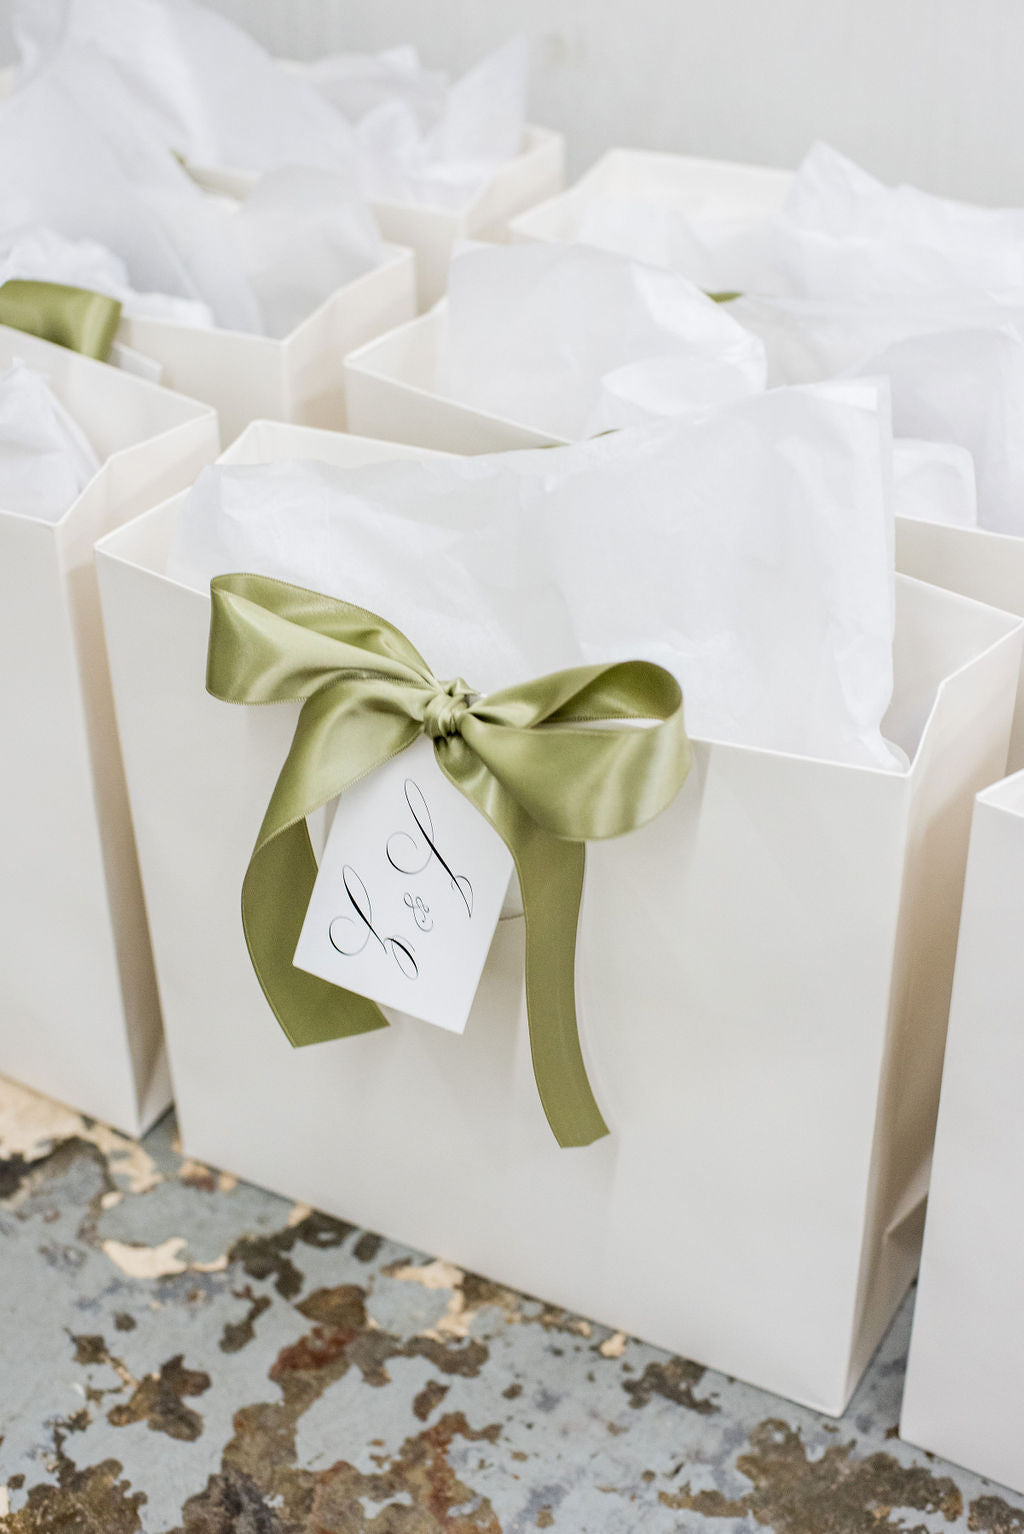 charlottesville wedding welcome bags